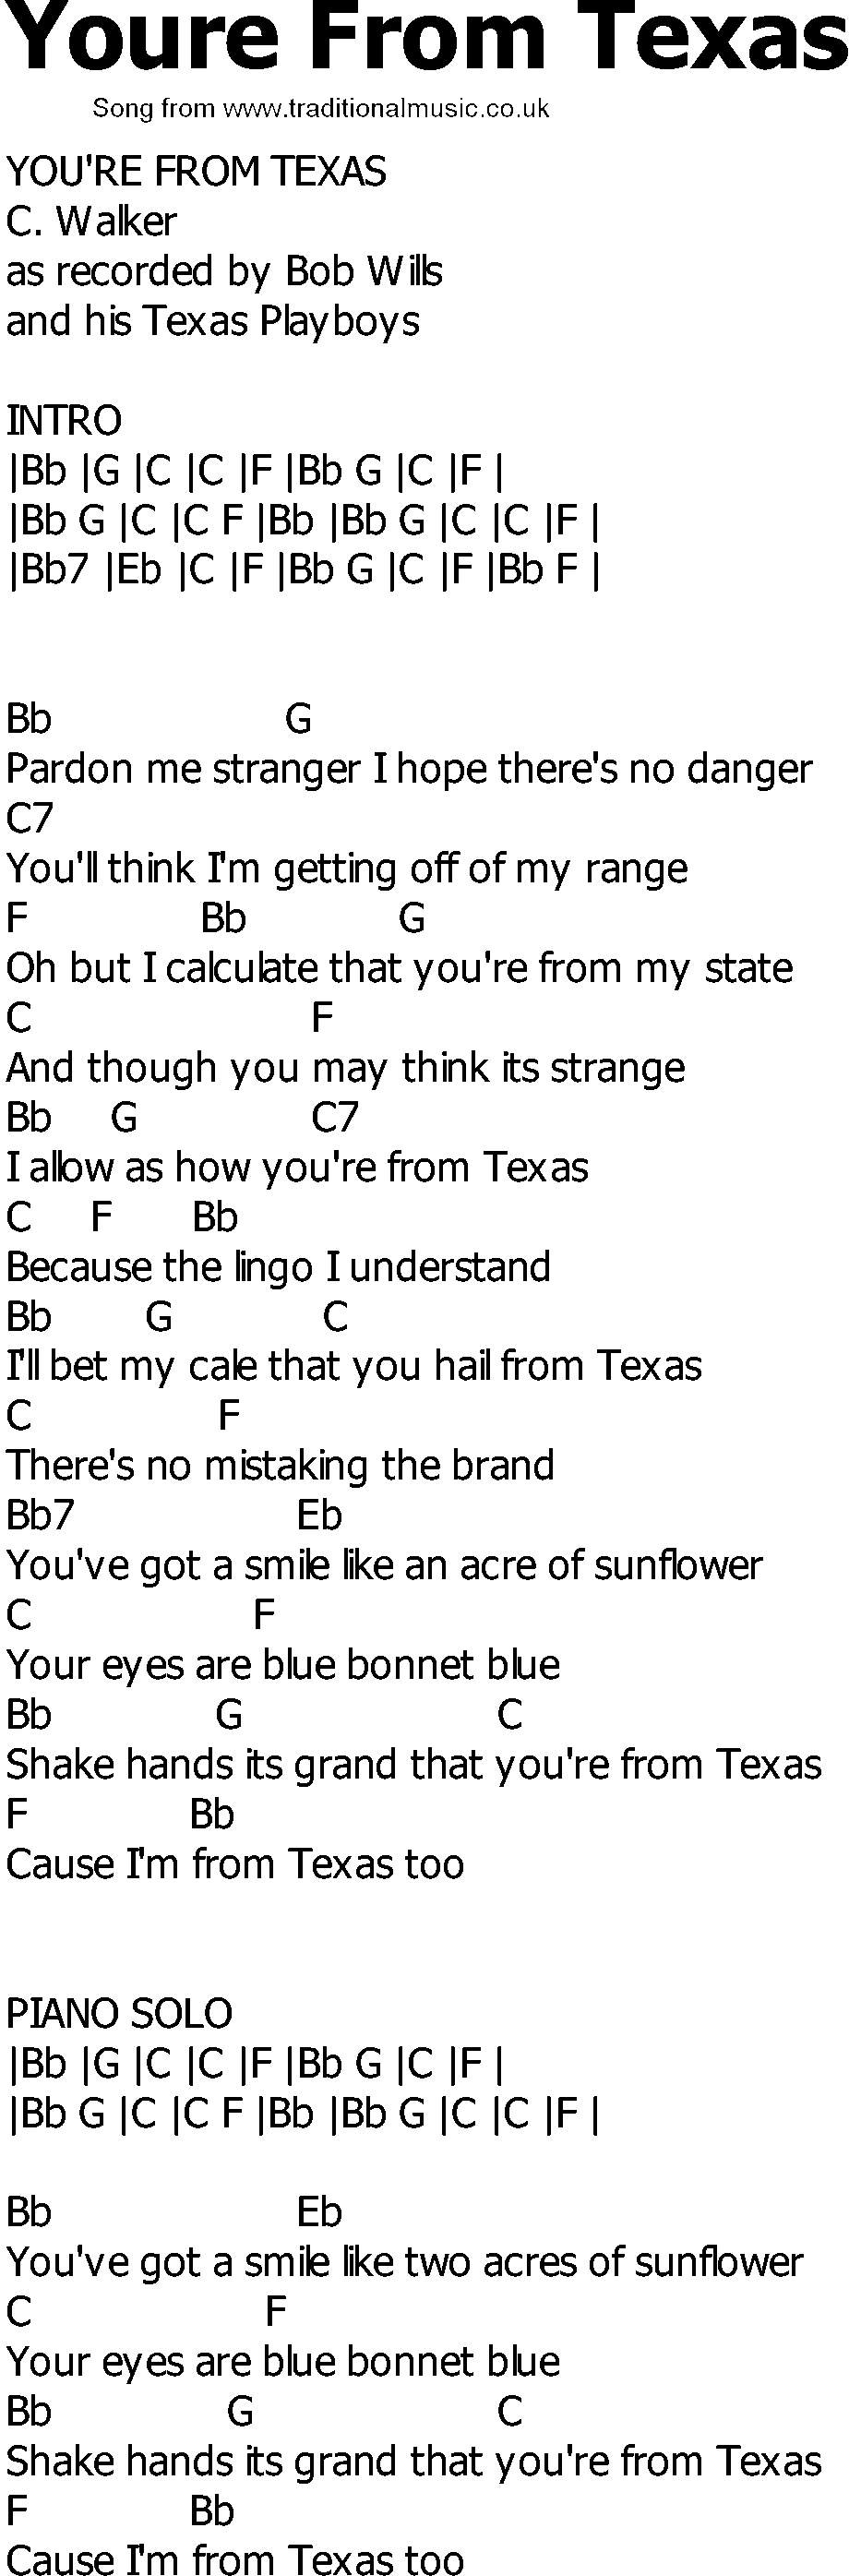 Old Country song lyrics with chords - Youre From Texas